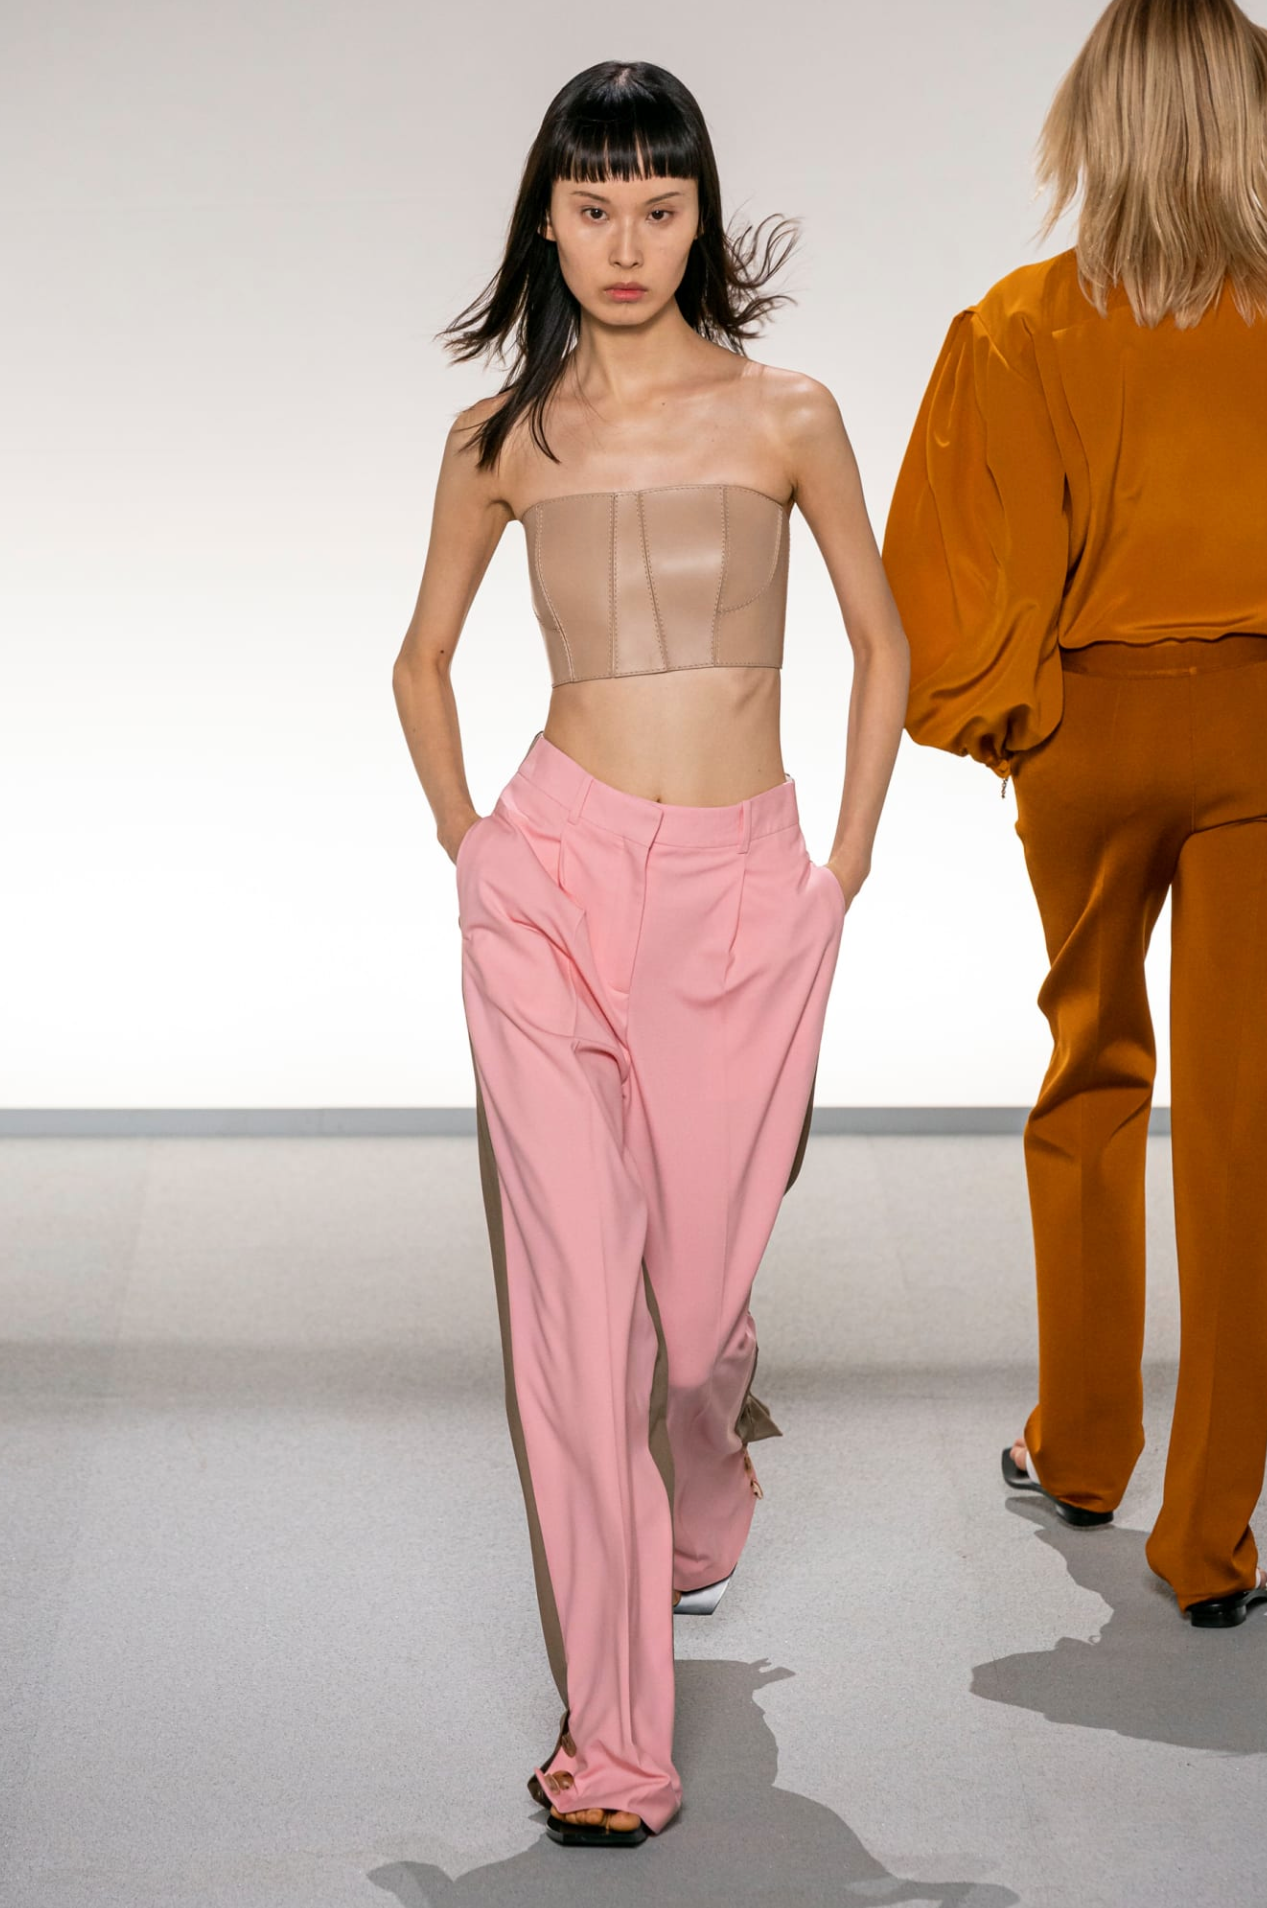 2020 S/S Pleated Wool Trousers by Givenchy on model on 2020 runway from vogue archives  @recessla